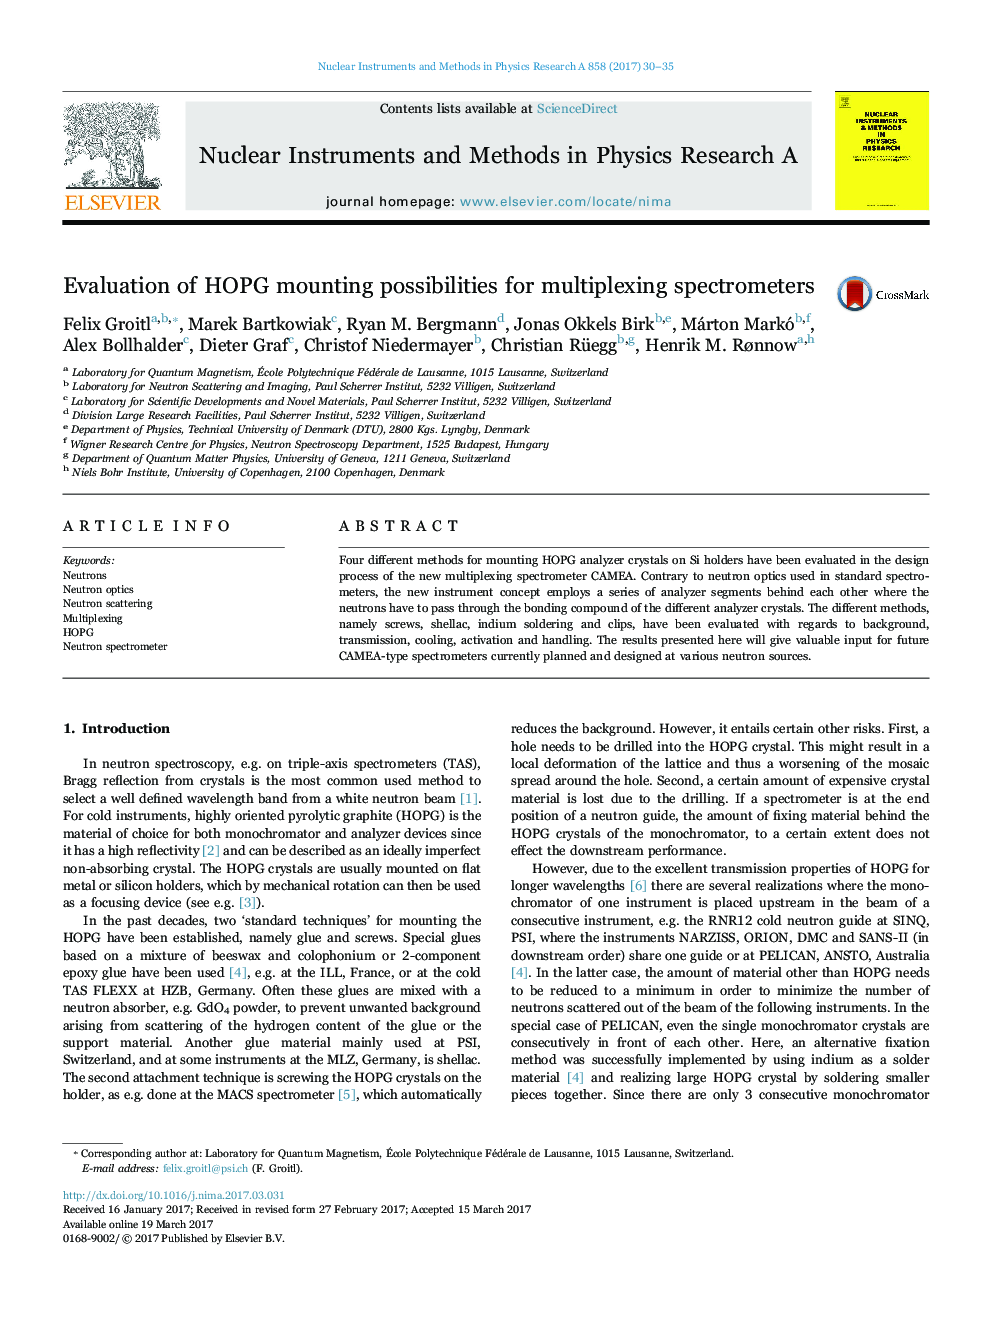 Evaluation of HOPG mounting possibilities for multiplexing spectrometers